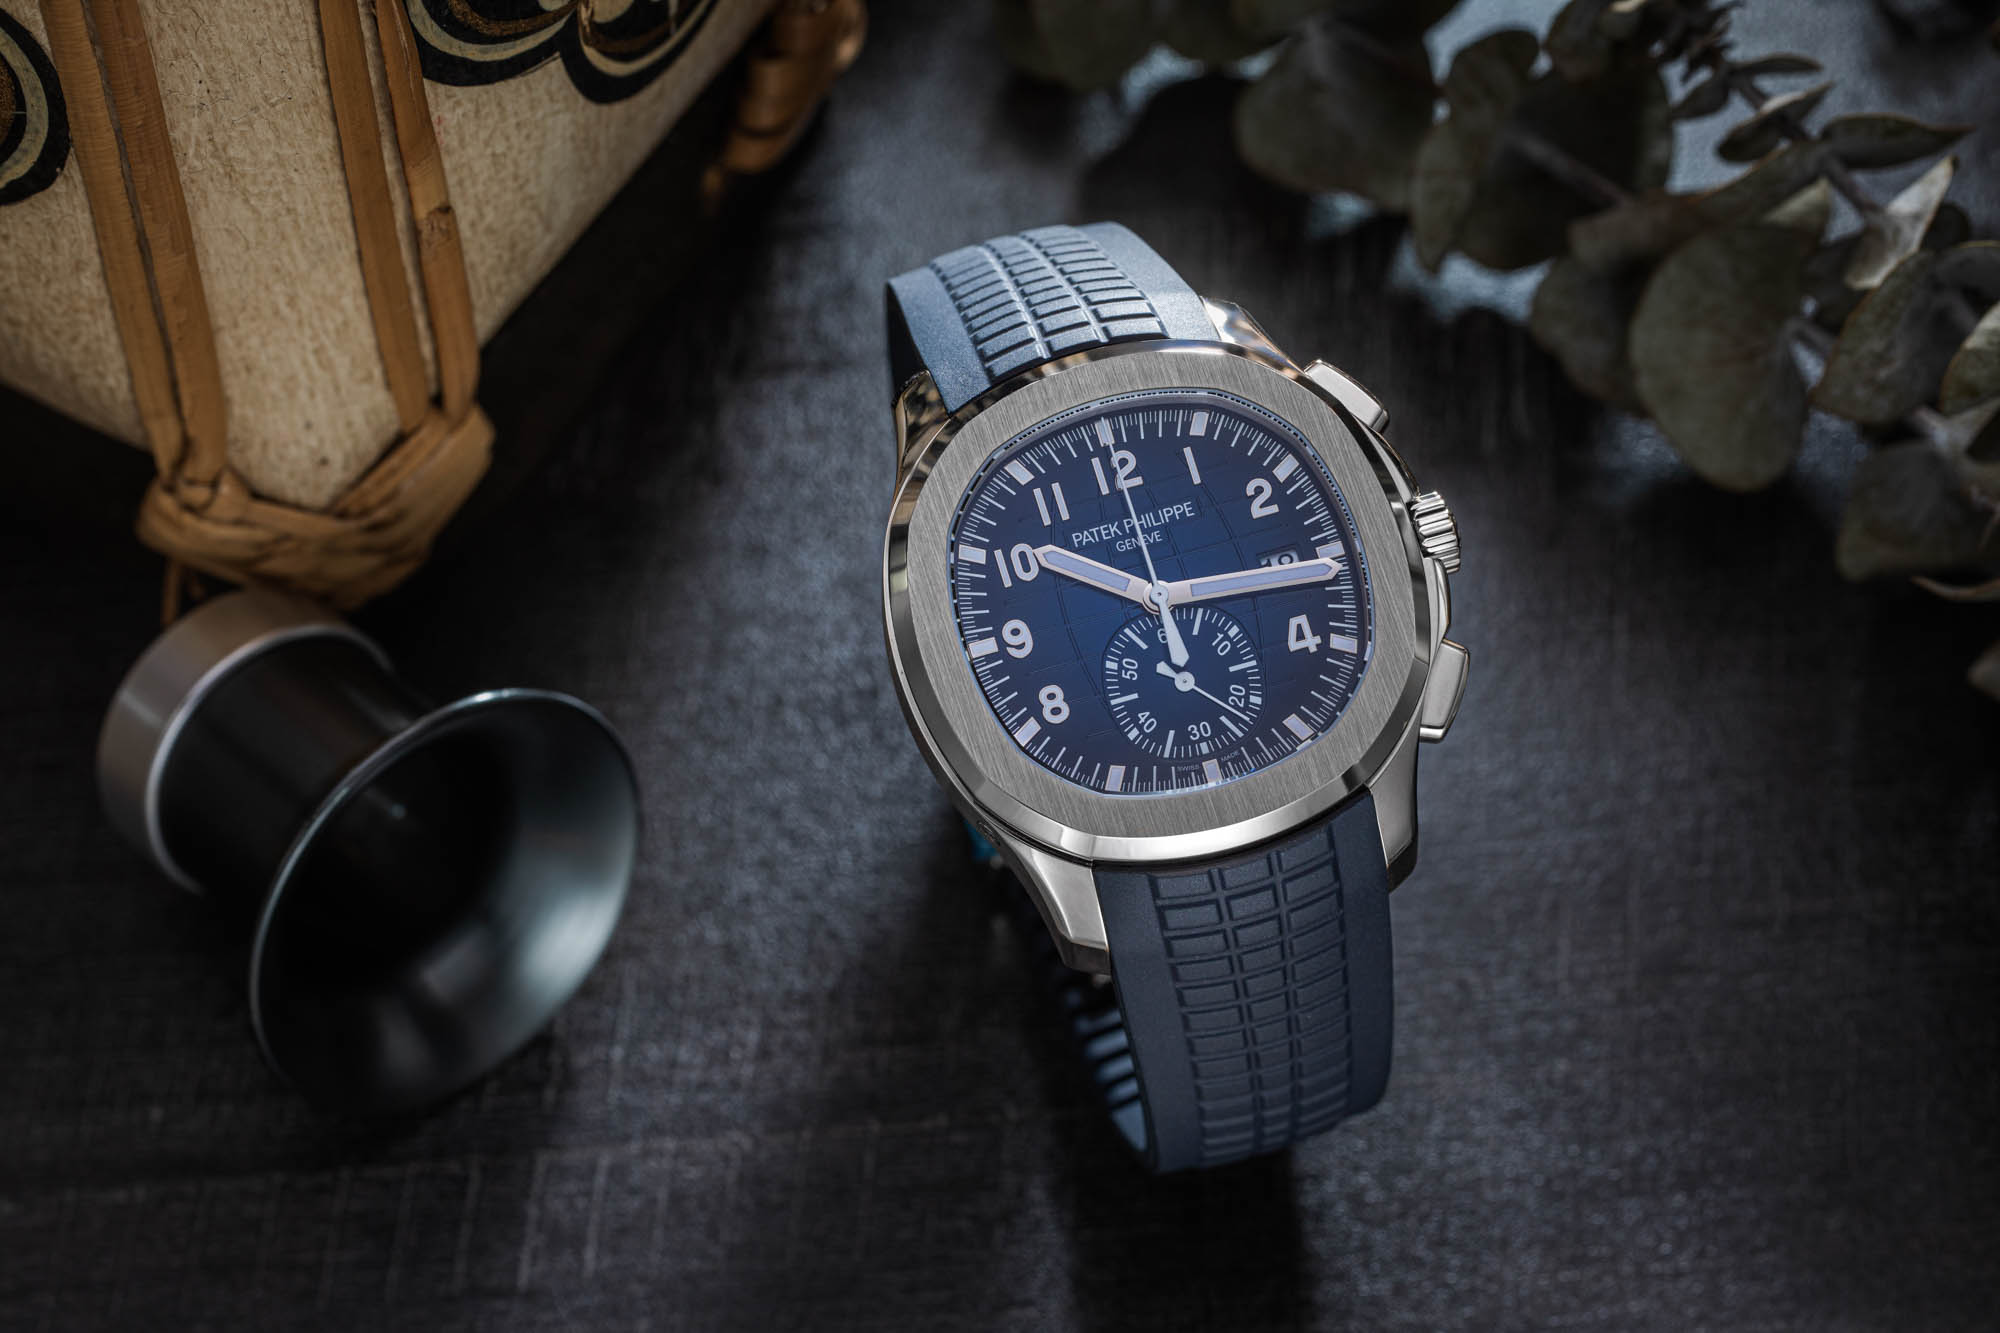 Patek Philippe Aquanaut Flyback Chronograph Ref. 5968G 001 Features A Blue Black Gradient Dial And Midnight Blue Composite Strap, Contrasting Nicely With Its White Gold Case, Bezel, And Crown.